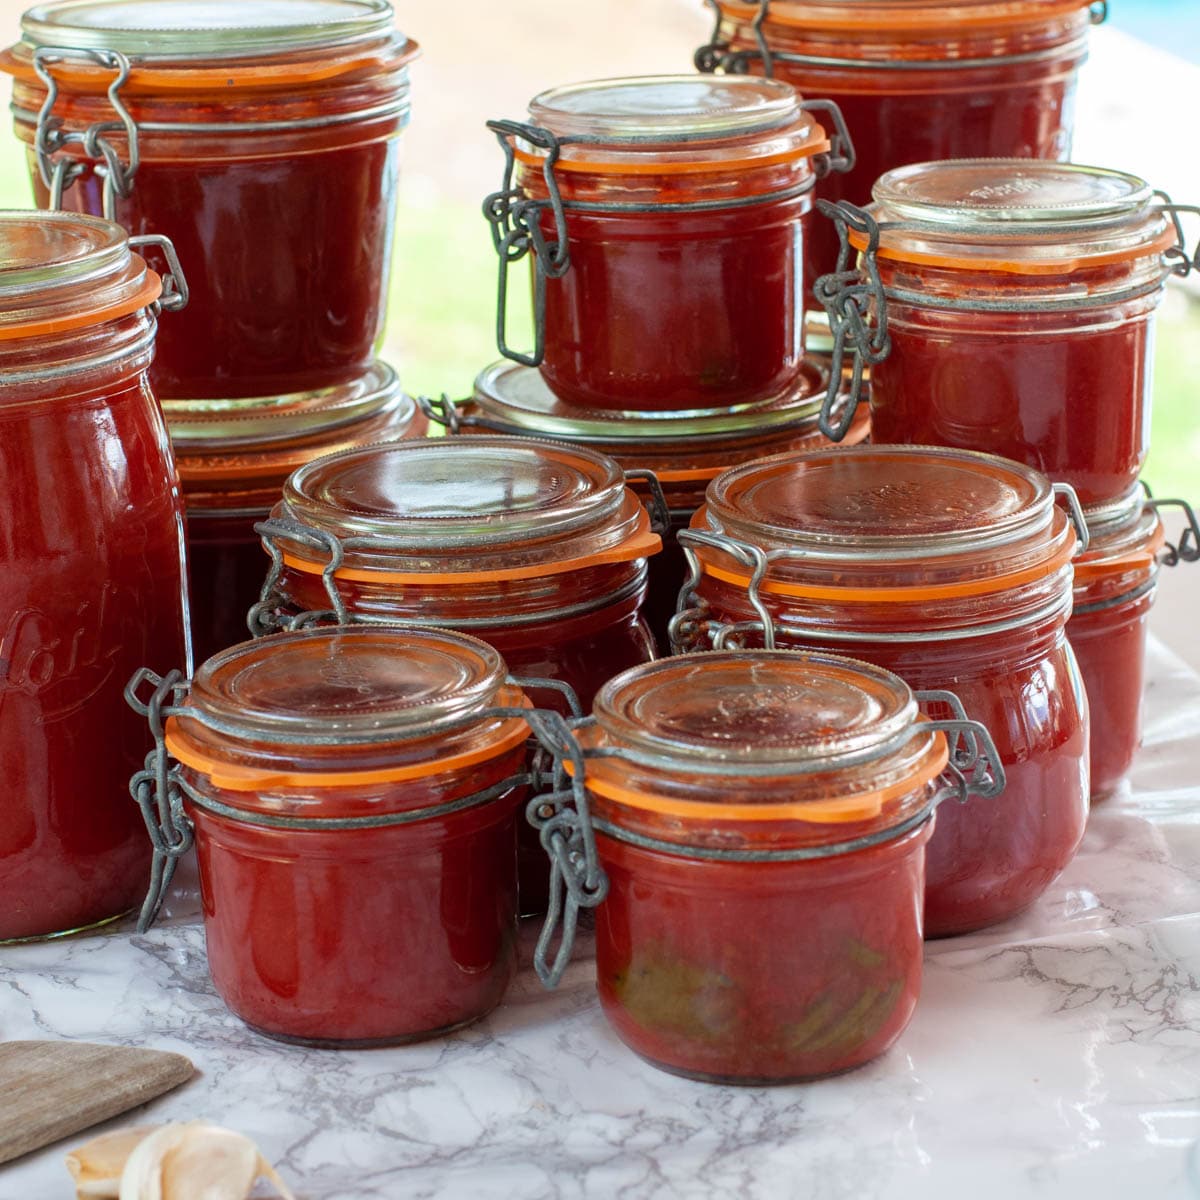 Tomato sauce with fresh tomatoes in jars